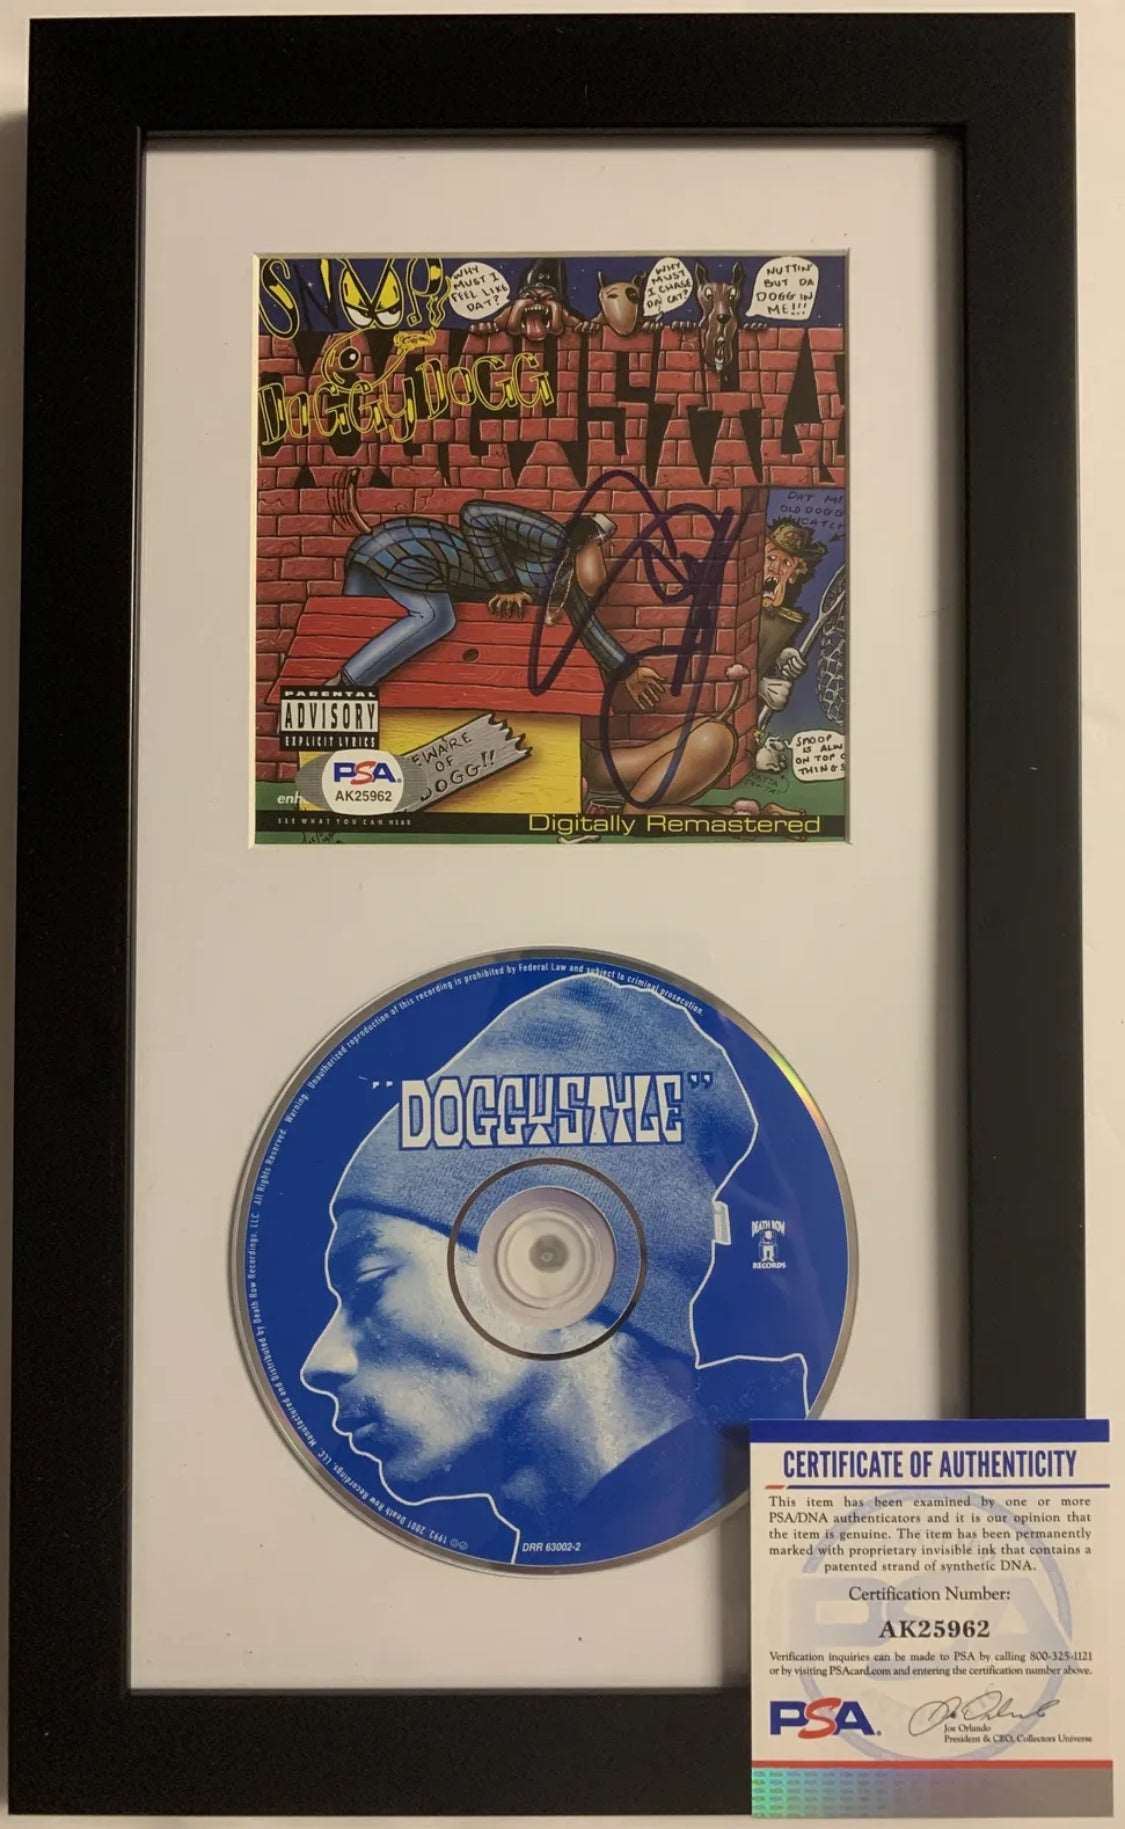 Autographed by Snoop Doggy dogg 🔥 Framed 1993 Snoop Dogg Doggystyle CD Framed with Signed Album Cover PSA ✅